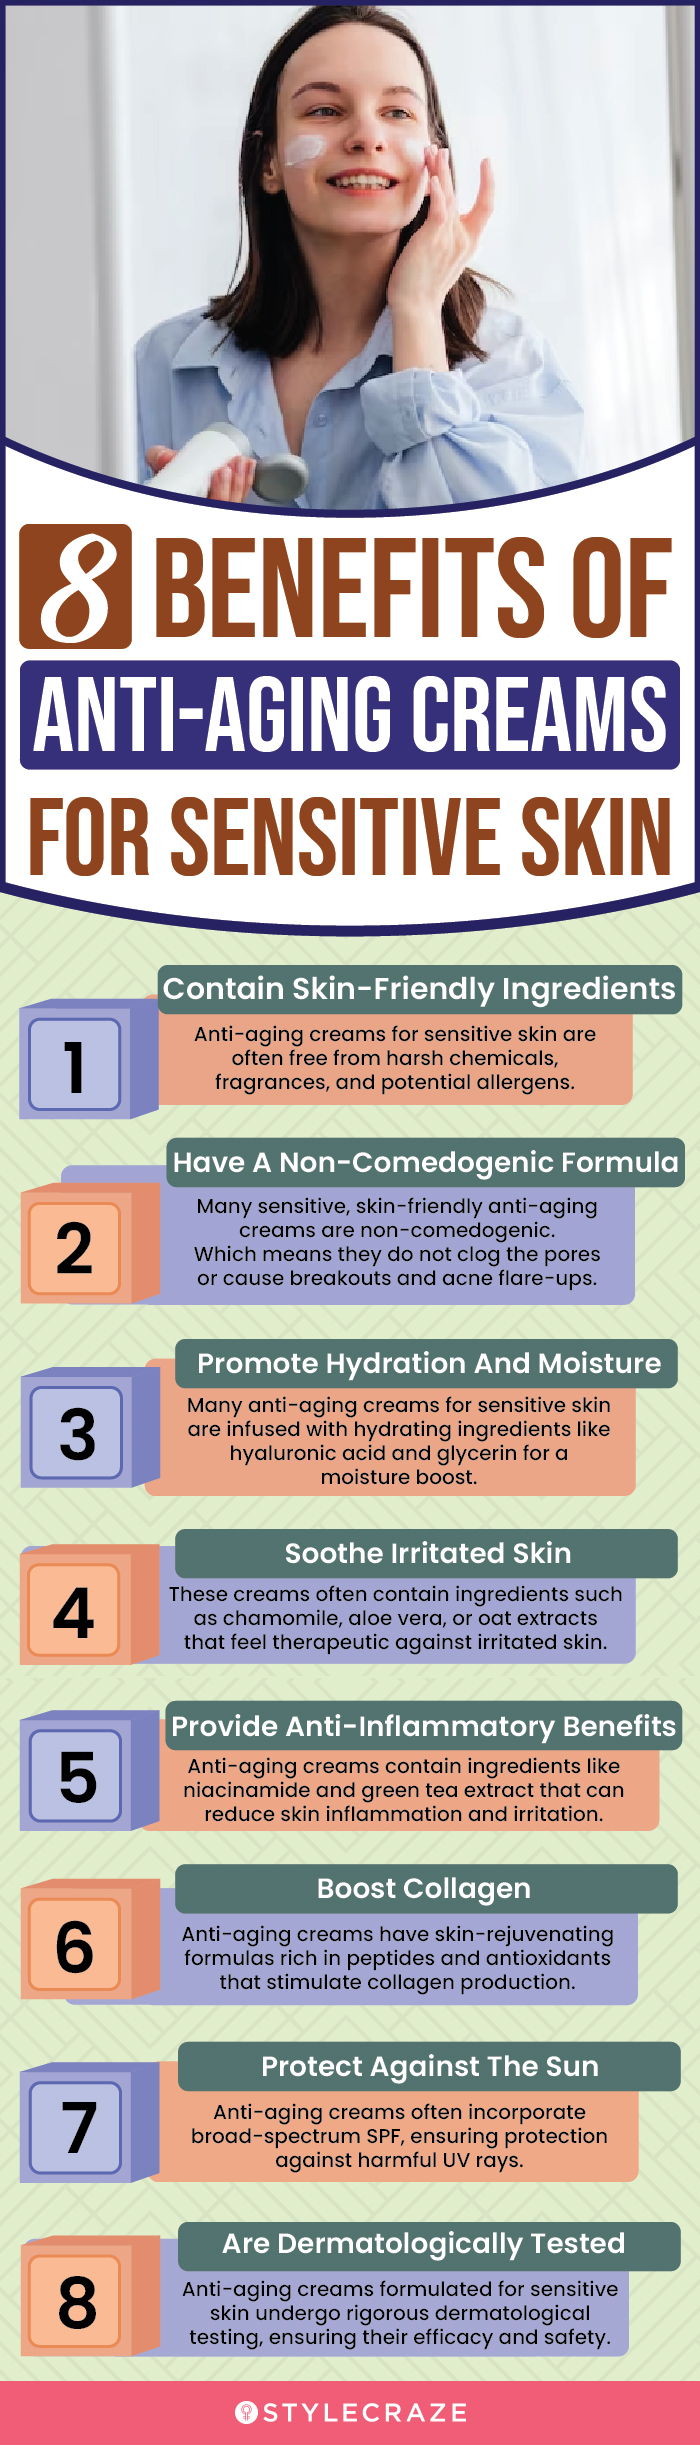 8 Benefits Of Anti-Aging Creams For Sensitive Skin (infographic)